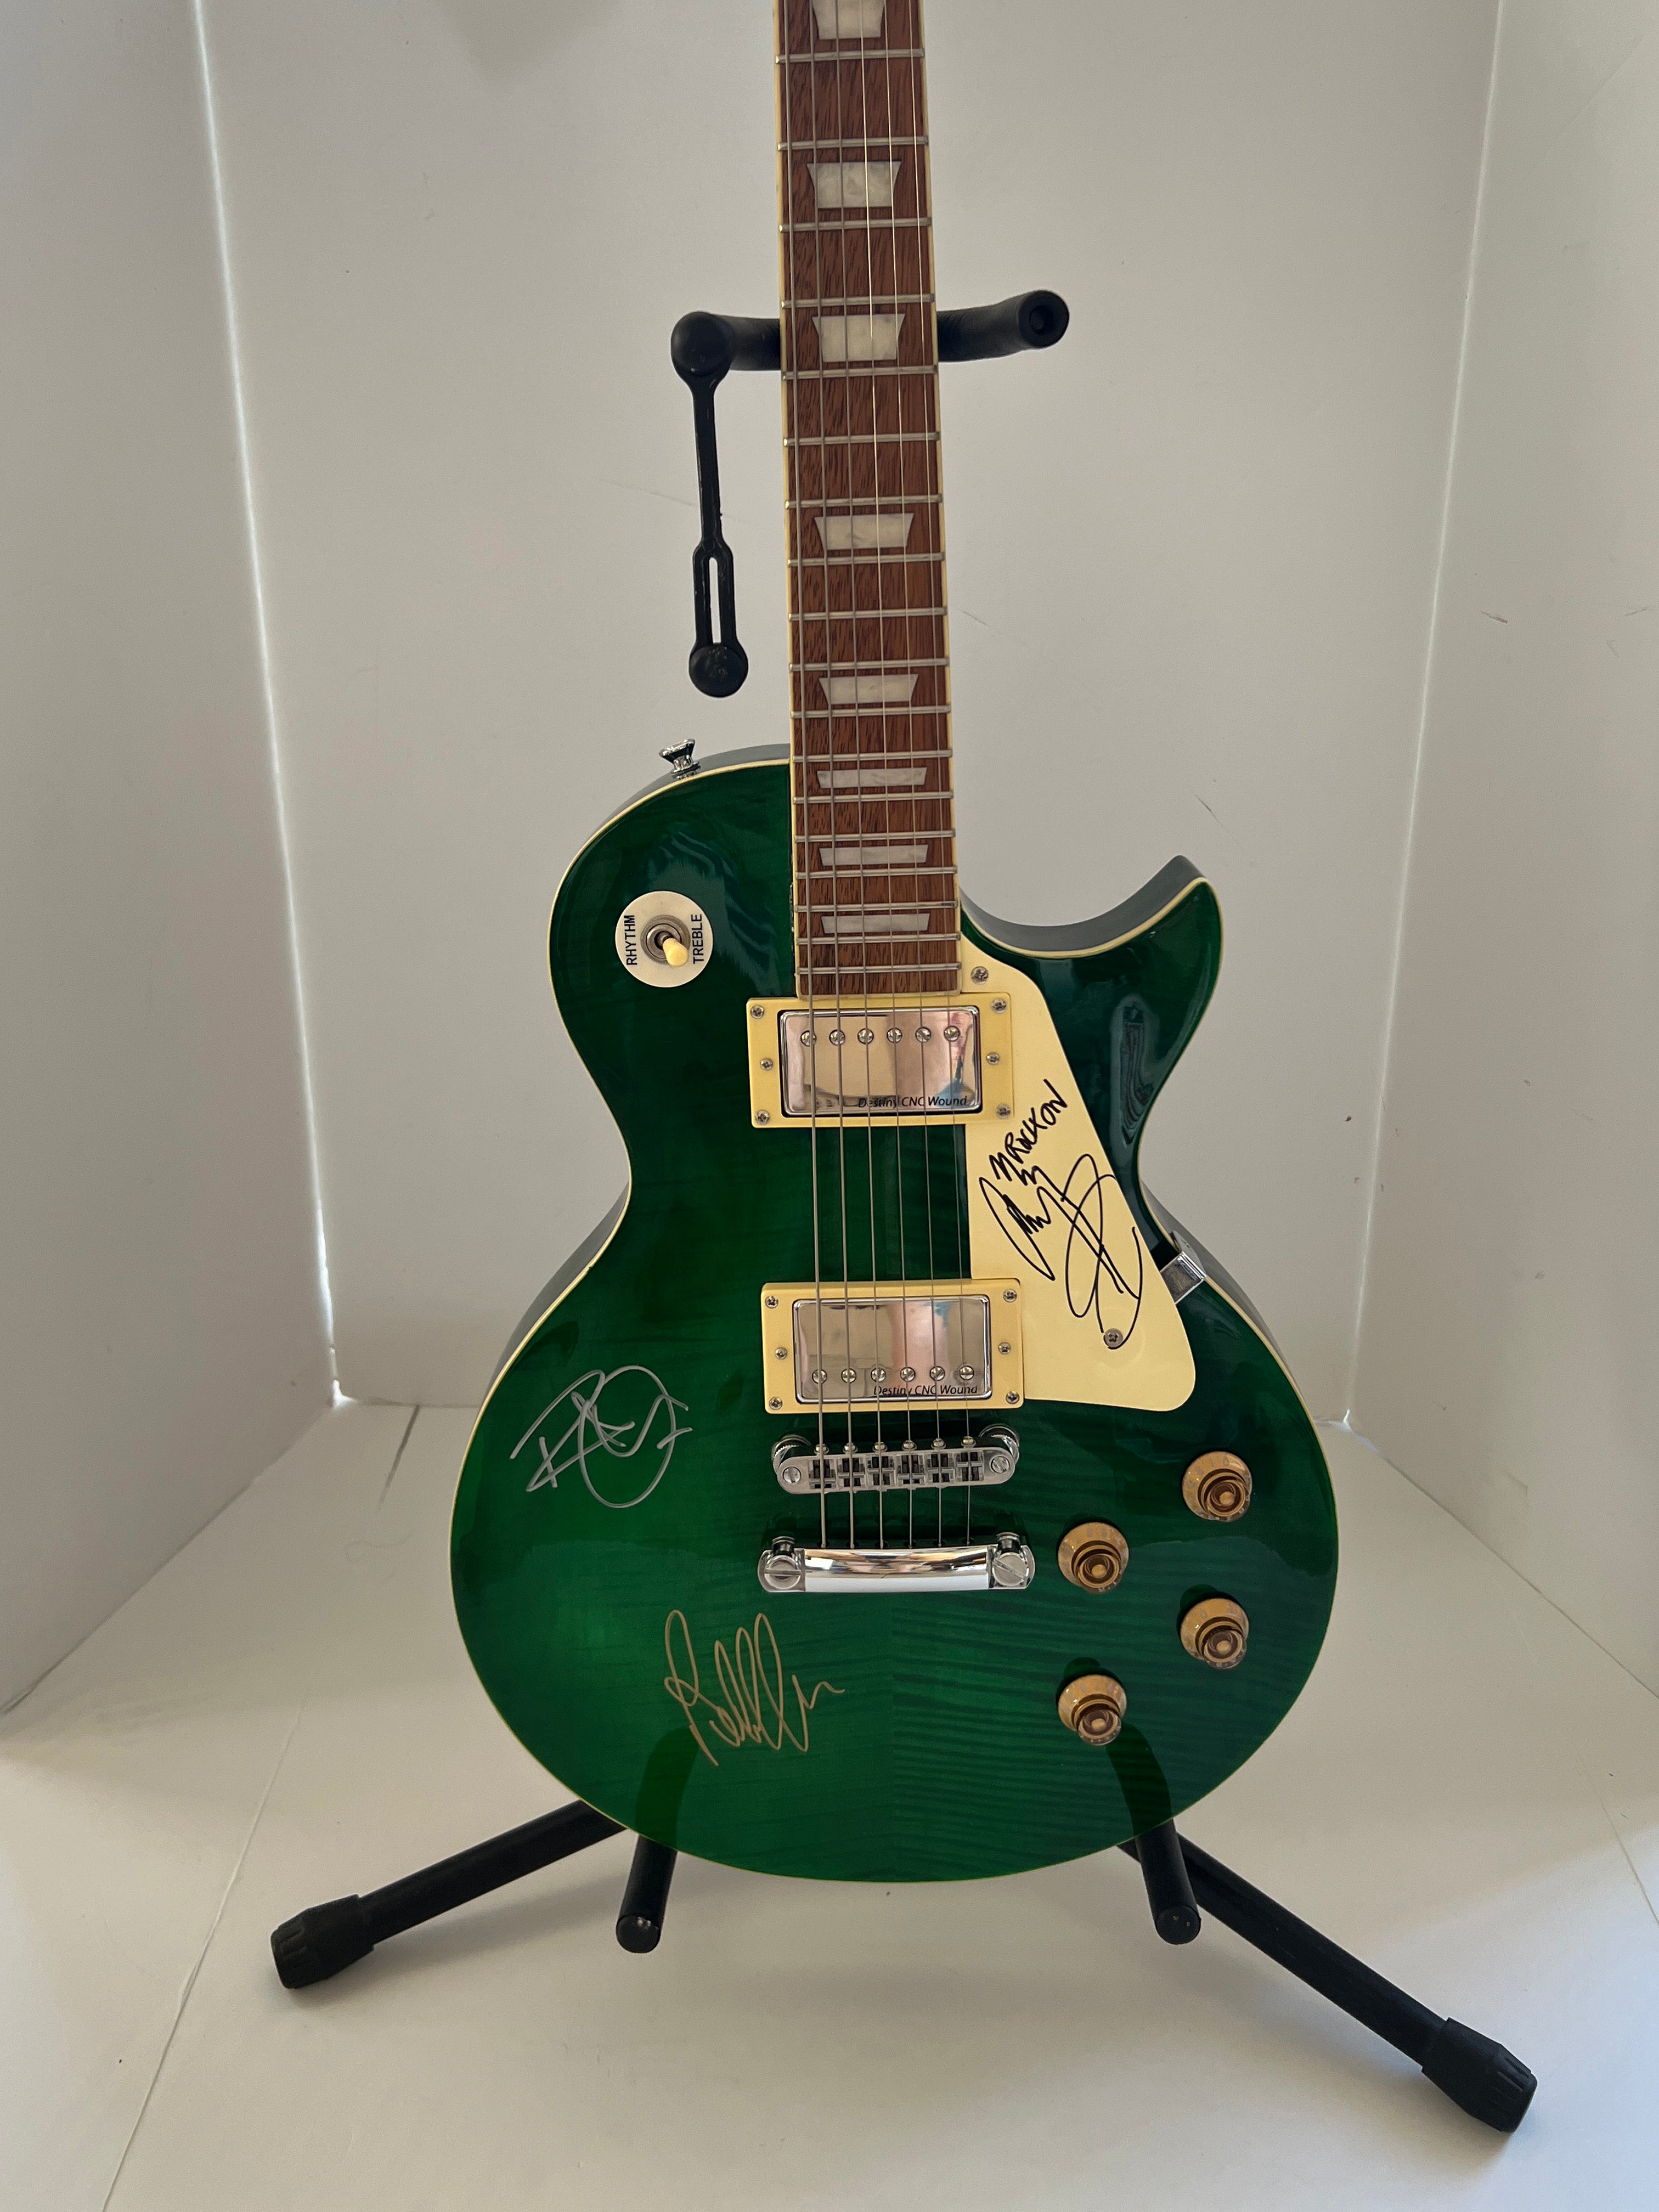 Jimmy Page, Robert Plant, John Paul Jones Led Zeppelin Les Paul one-of-a-kind full size guitar signed with proof